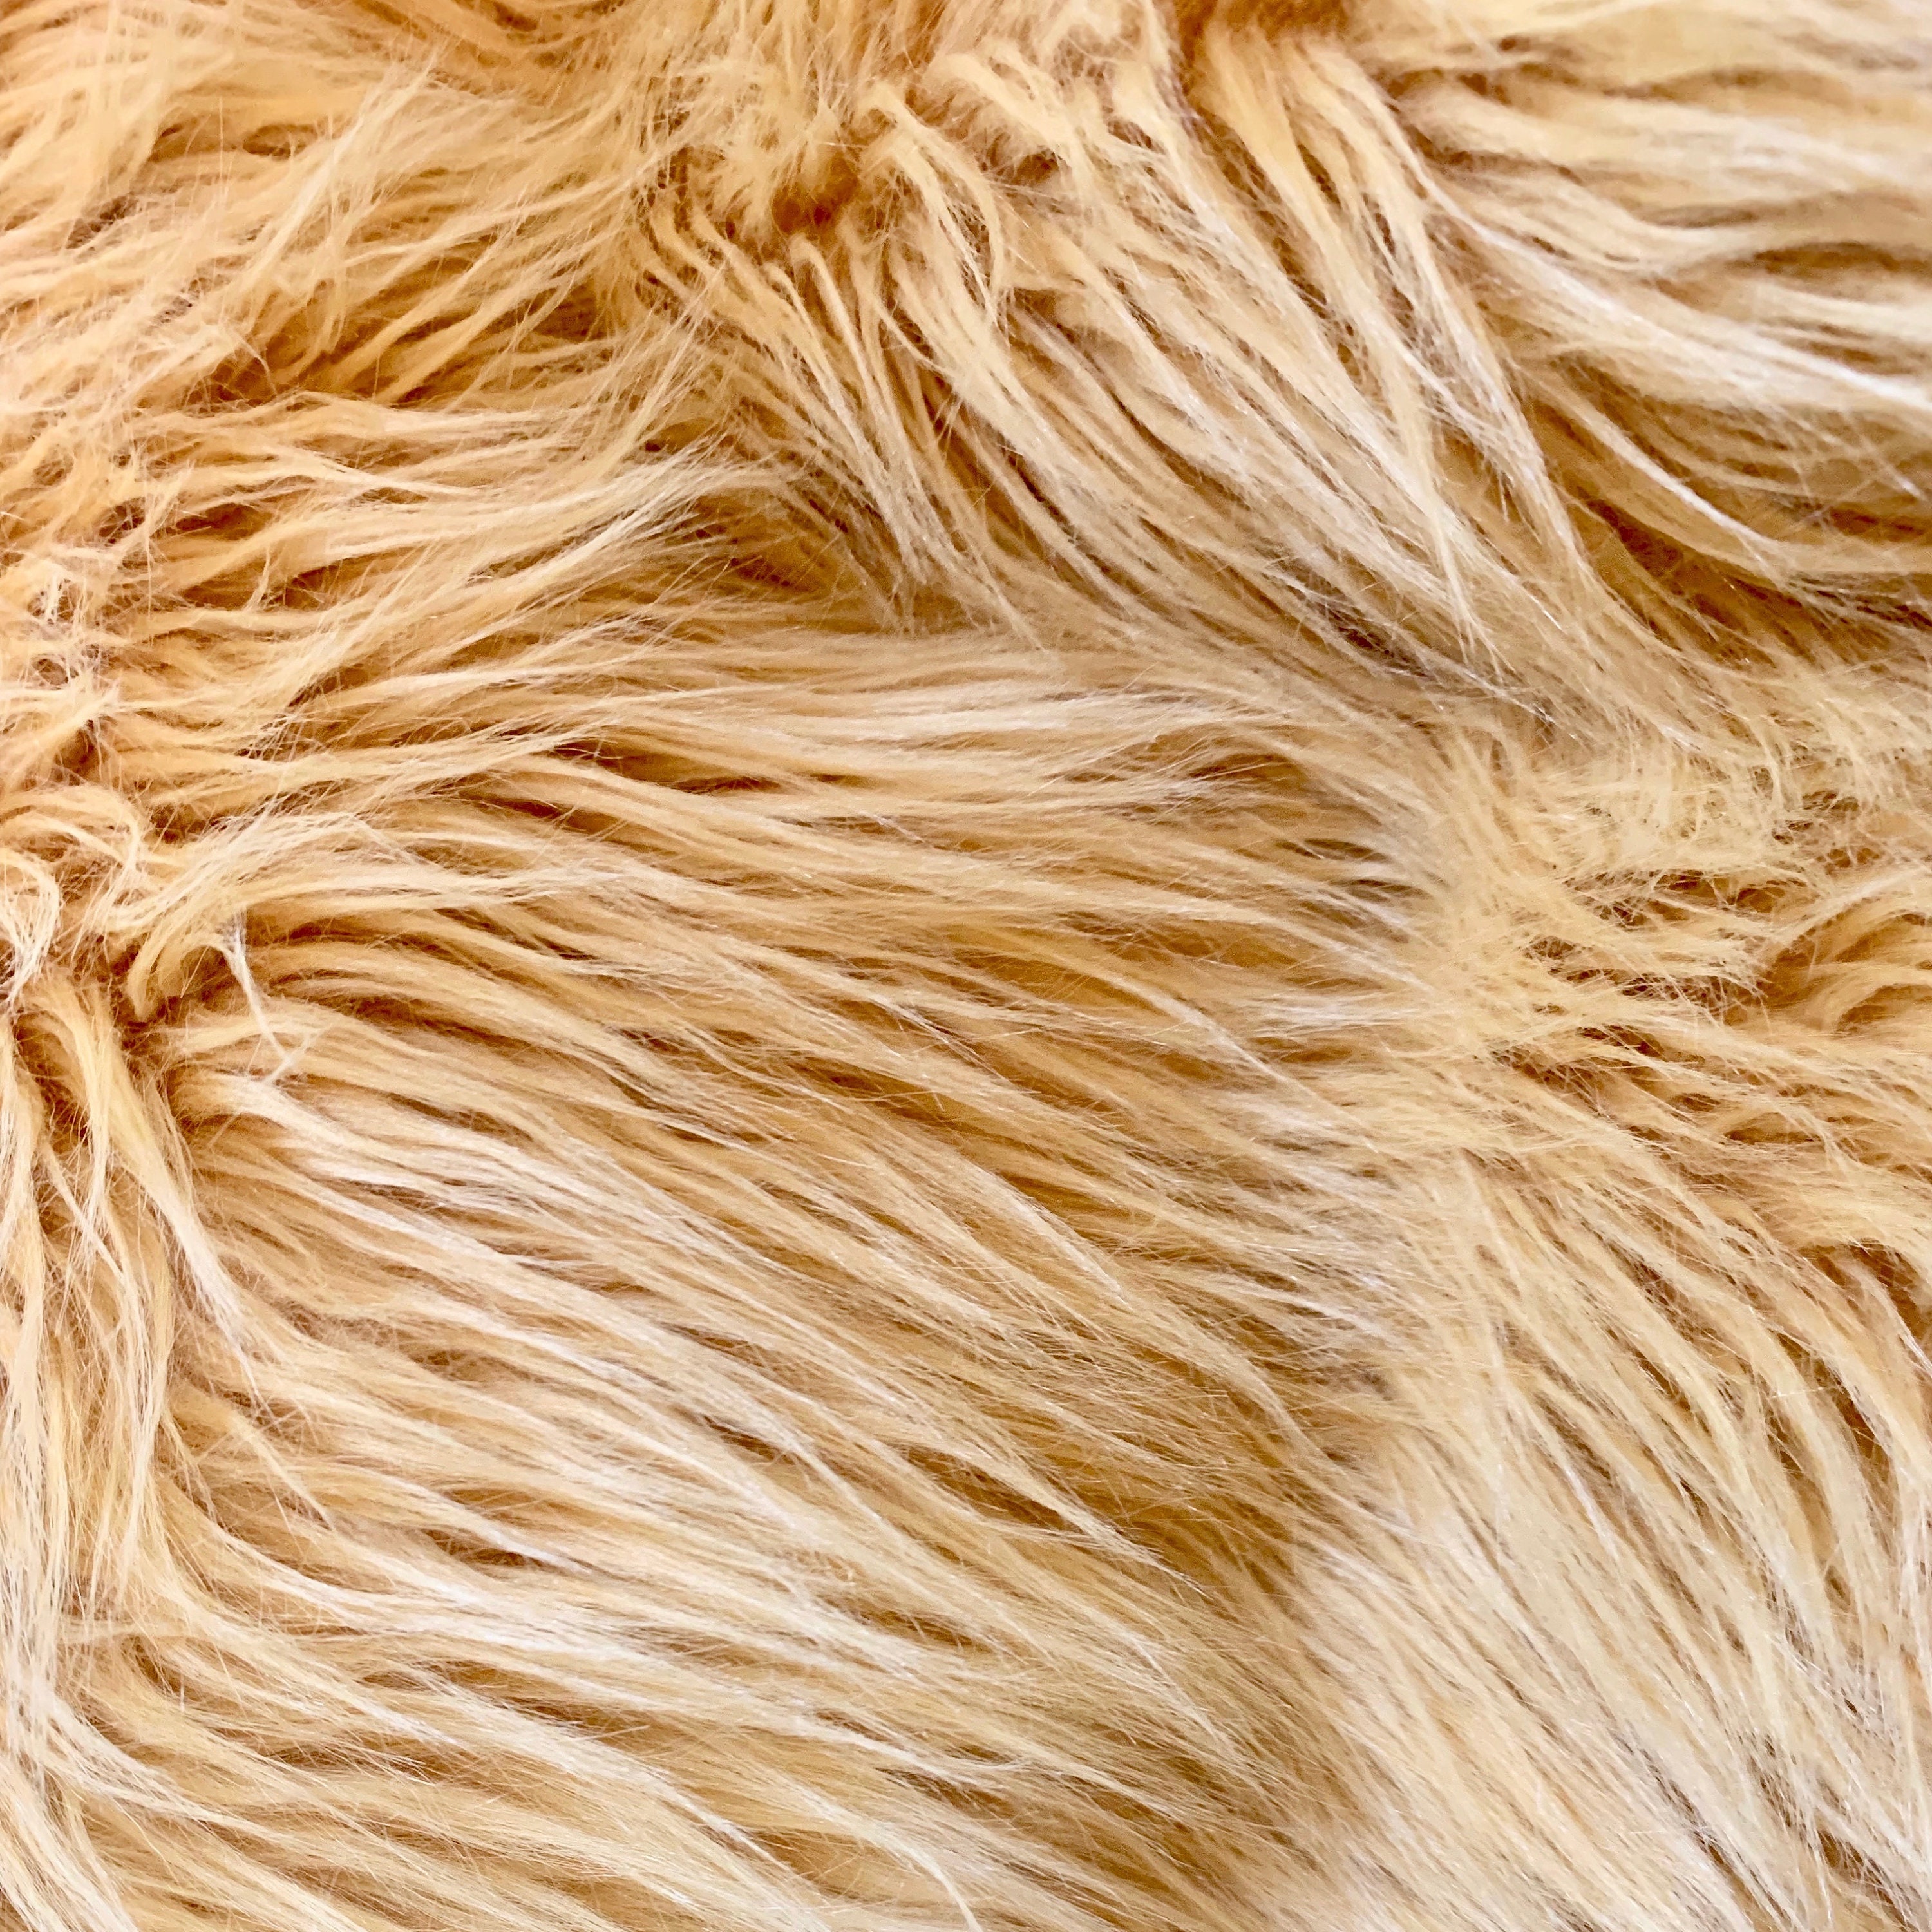 Eden DARK BROWN Shaggy Long Pile Soft Faux Fur Fabric for Fursuit, Cosplay  Costume, Photo Prop, Trim, Throw Pillow, Crafts